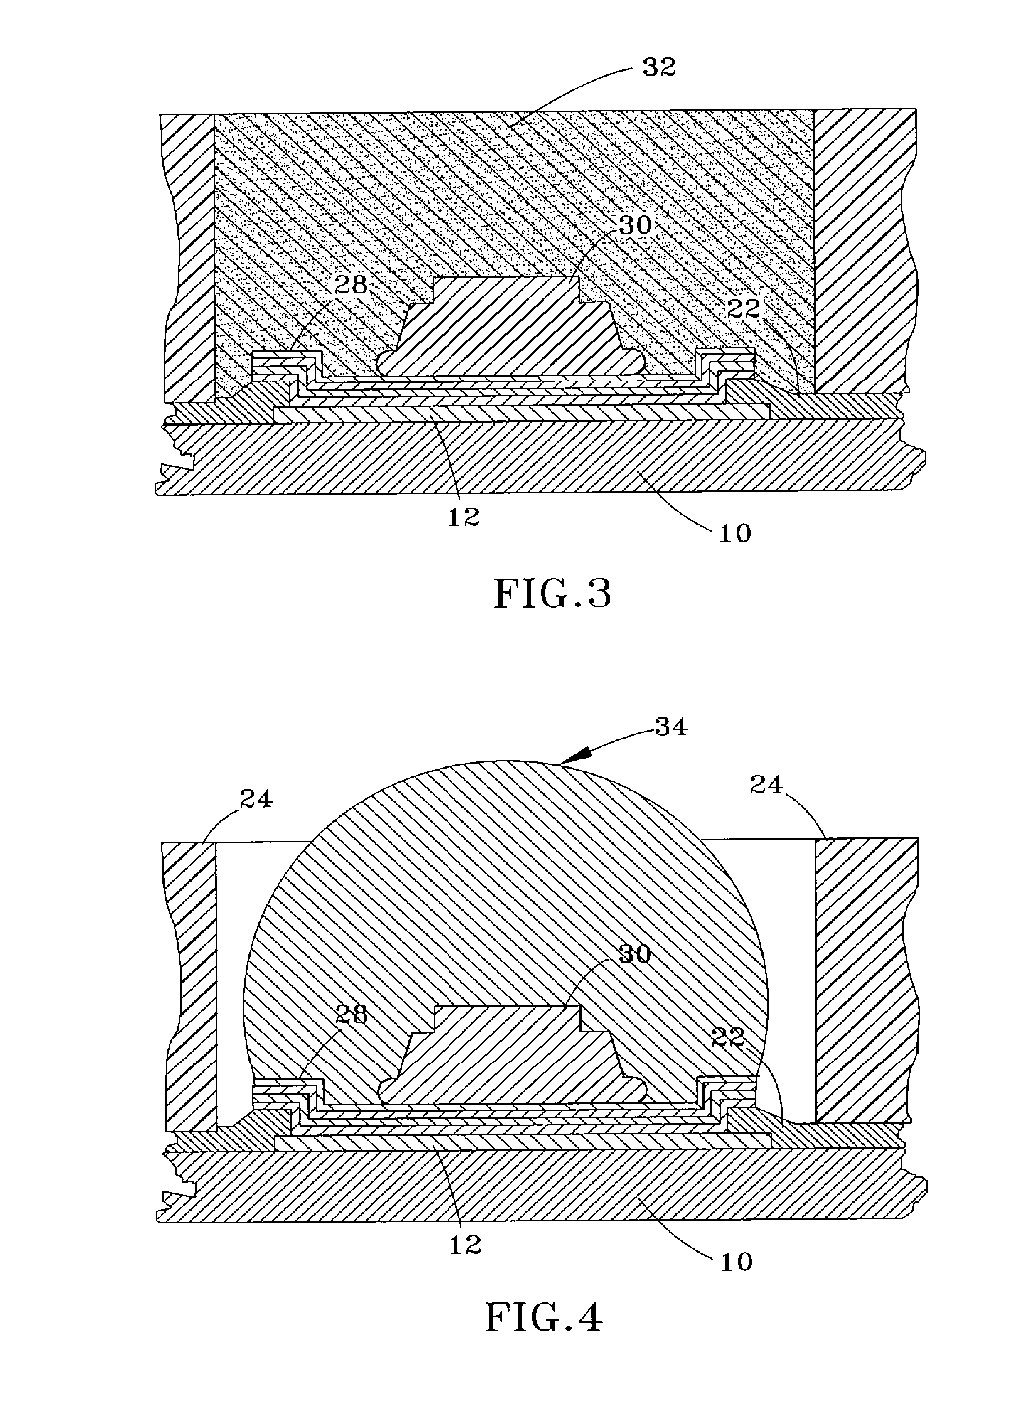 Method of solder bumping a circuit component and circuit component formed thereby